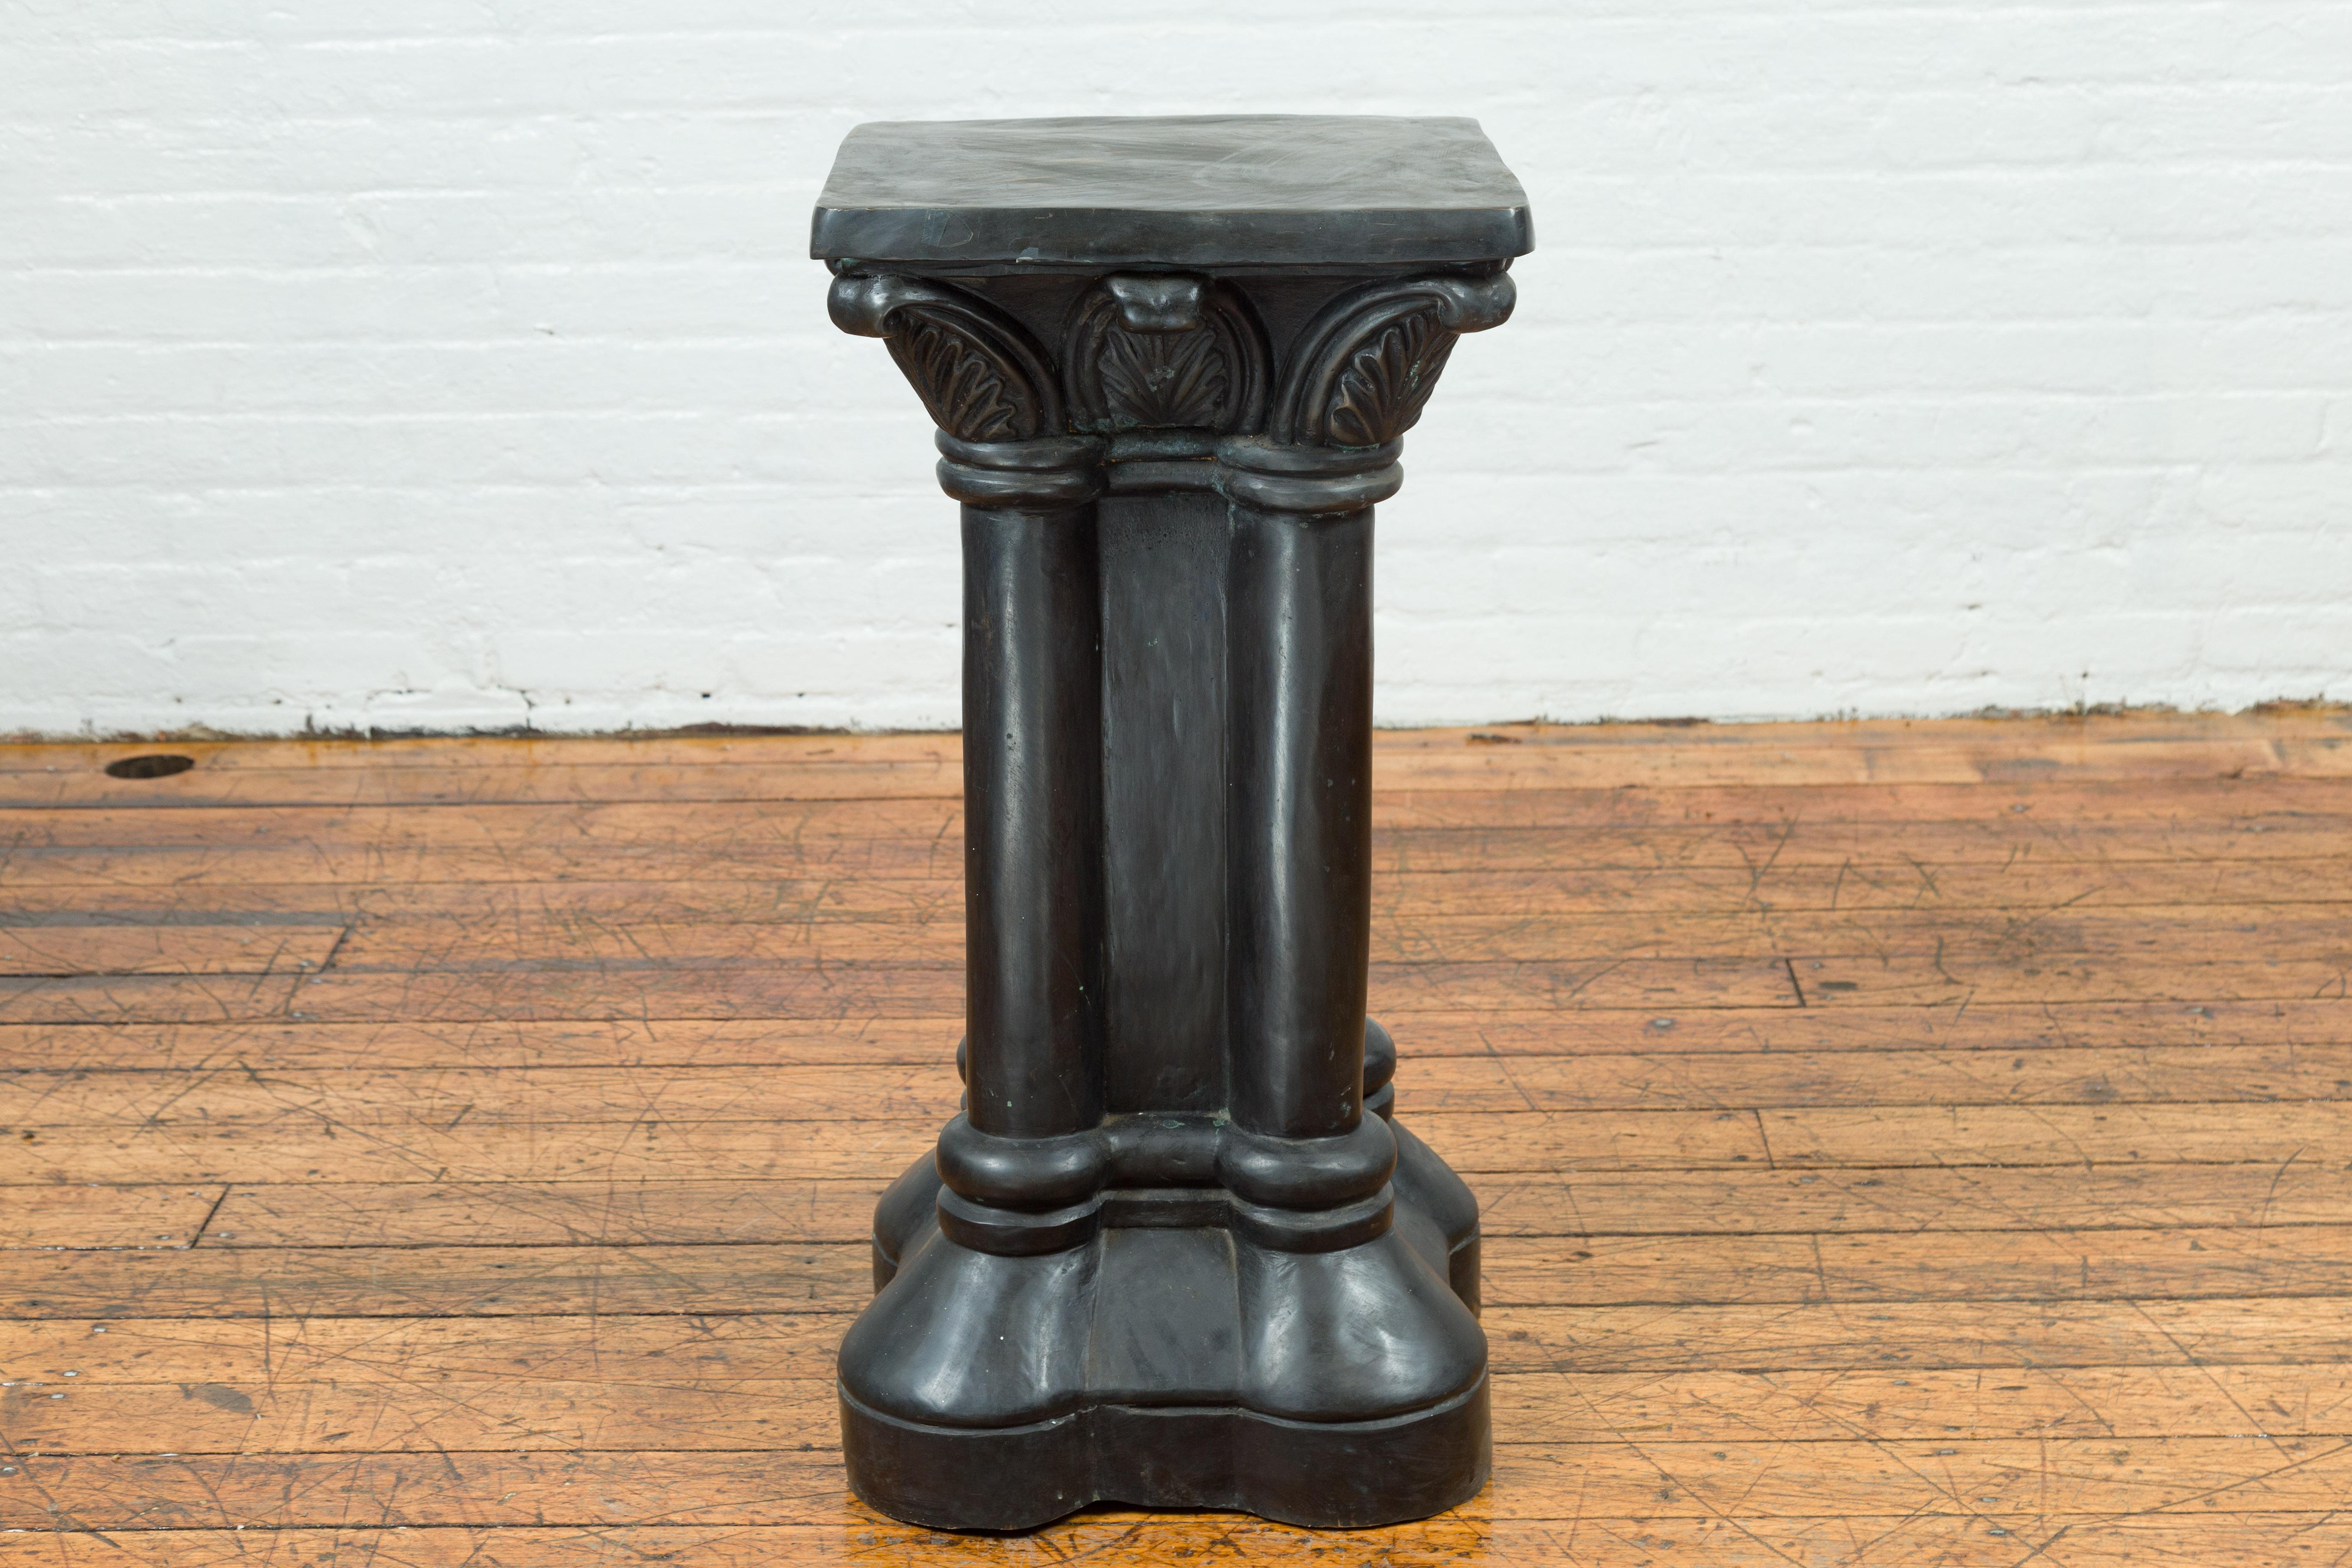 A vintage Greco-Roman style bronze pedestal base from the mid-20th century, with square top, palmette motifs and quadrilobe base. Charming us with its unusual presence and Greco-Roman inspired design, this pedestal base features a square top resting